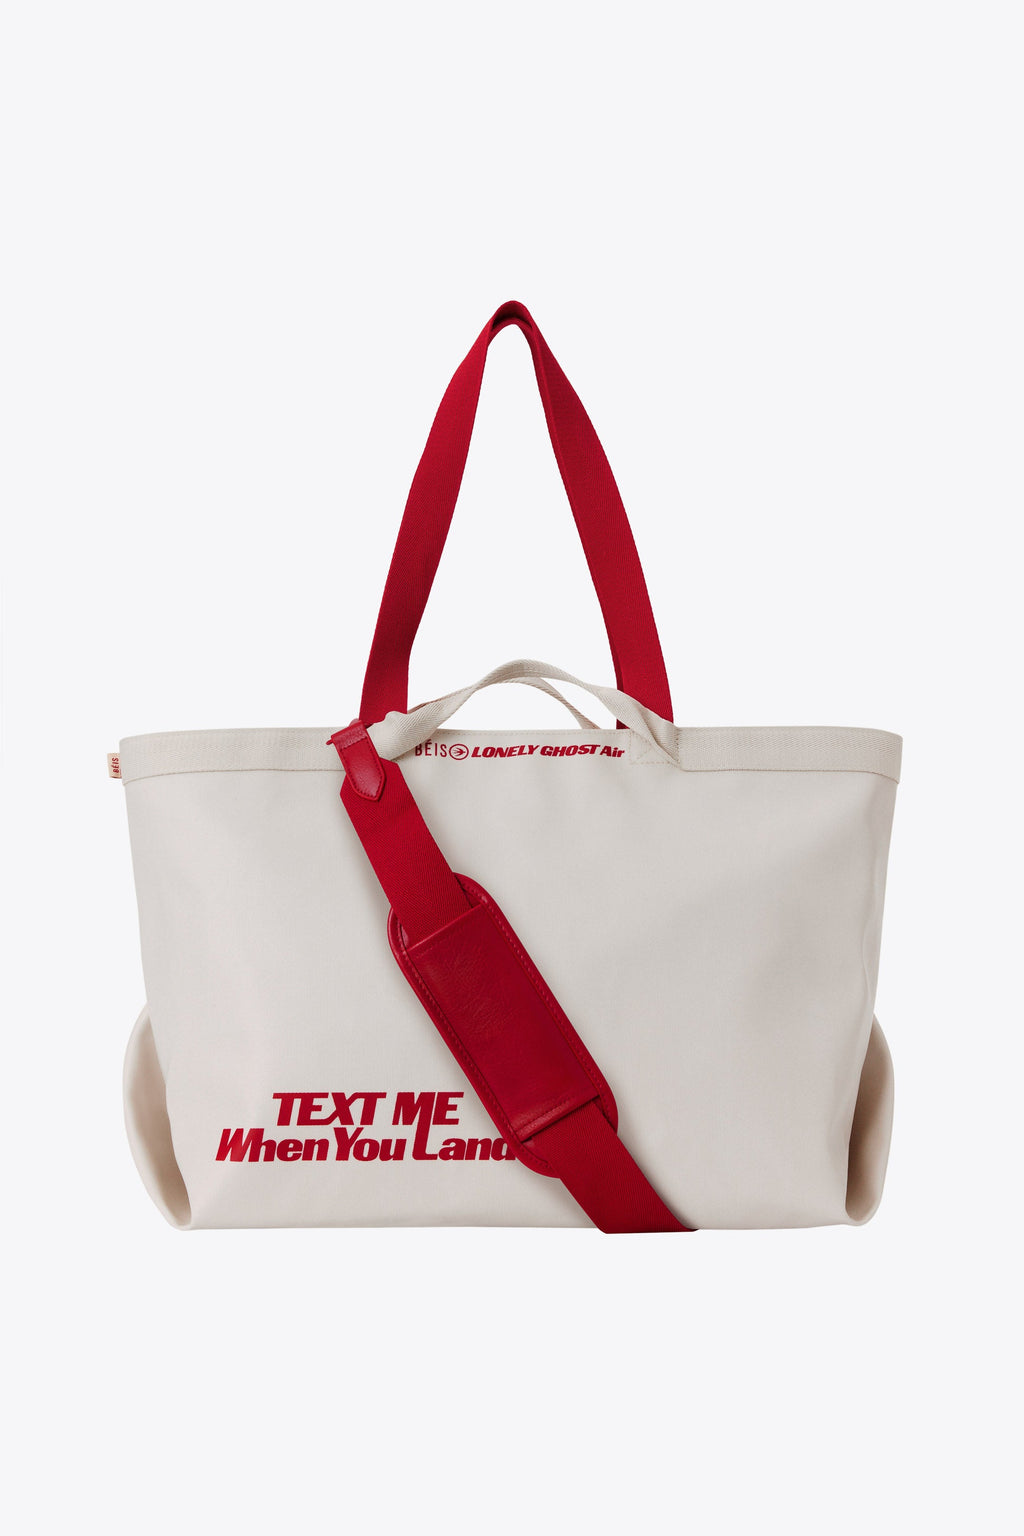 Tote Bags - Large Travel Tote Bags & Carry On Tote Purses for Women